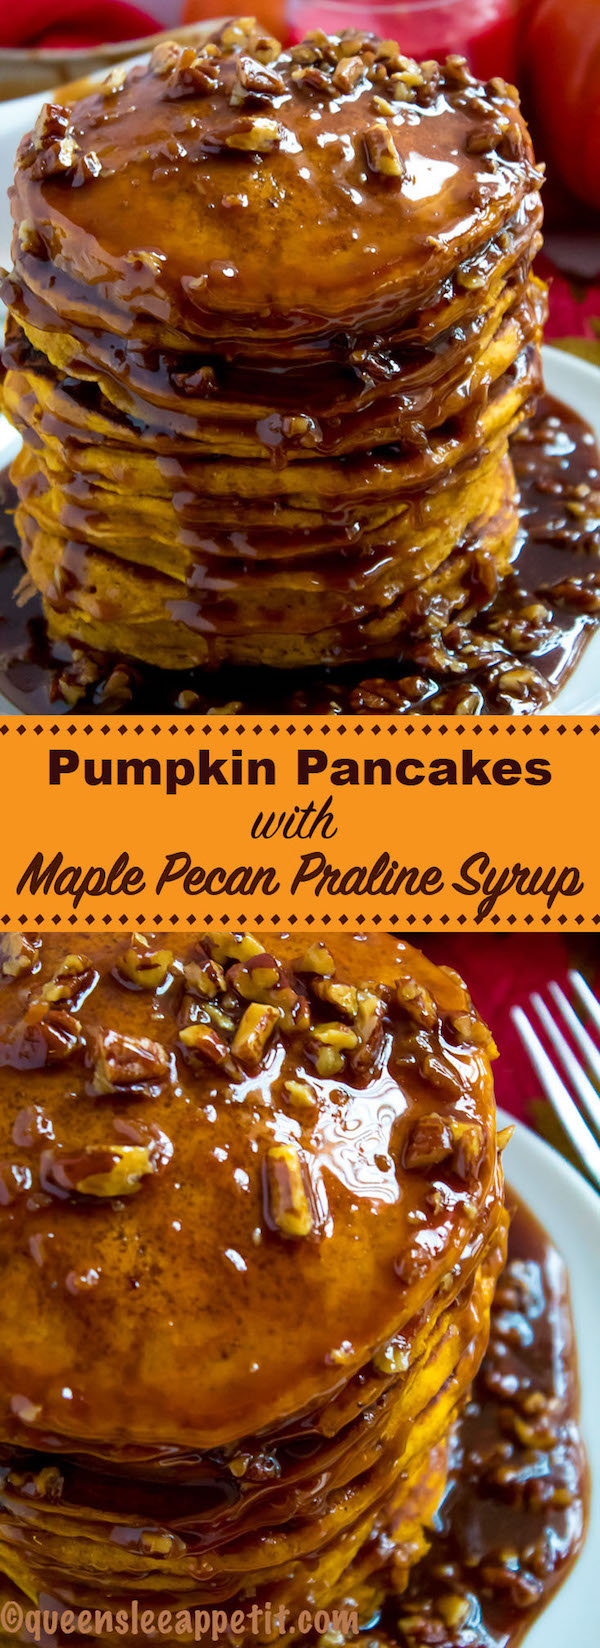 These Pumpkin Pancakes are light, fluffy and has the perfect amount of pumpkin and spice flavour! Topped with a rich and delicious Maple Pecan Praline Syrup, these irresistible pancakes are the perfect fall breakfast! 